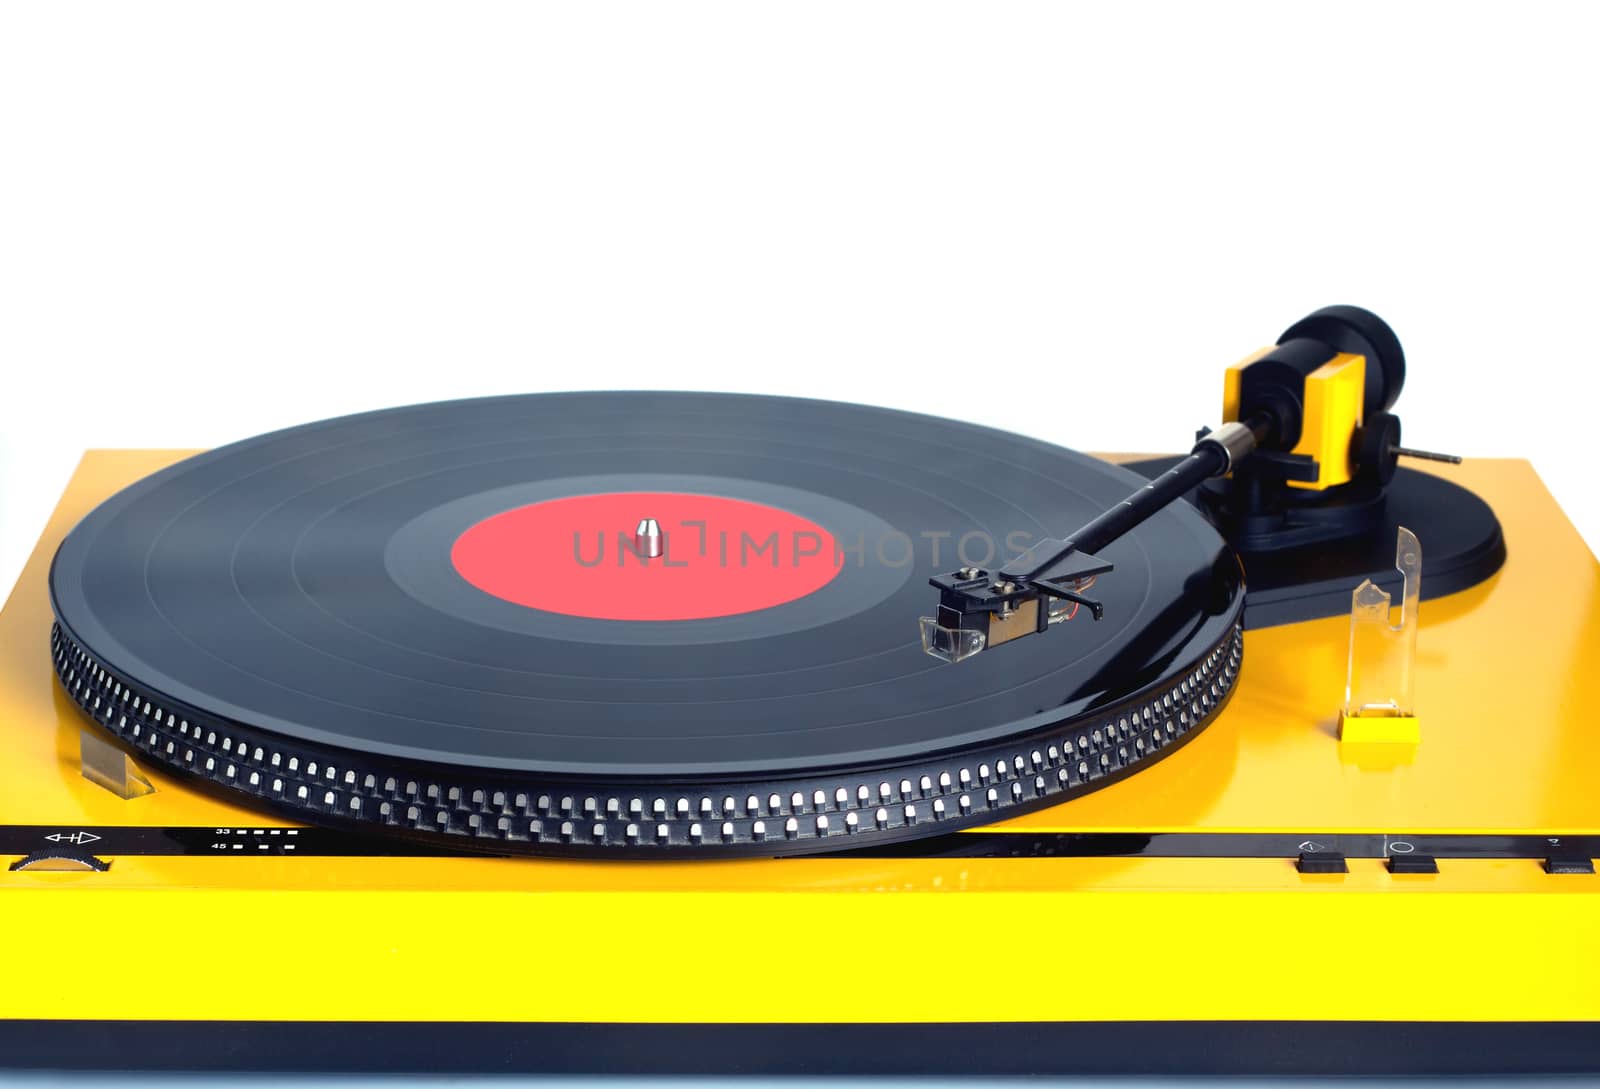 Modern turntable in silver case with rotation vinyl record with red label isolated on white background. Horizontal photo front view close-up by dymaxfoto